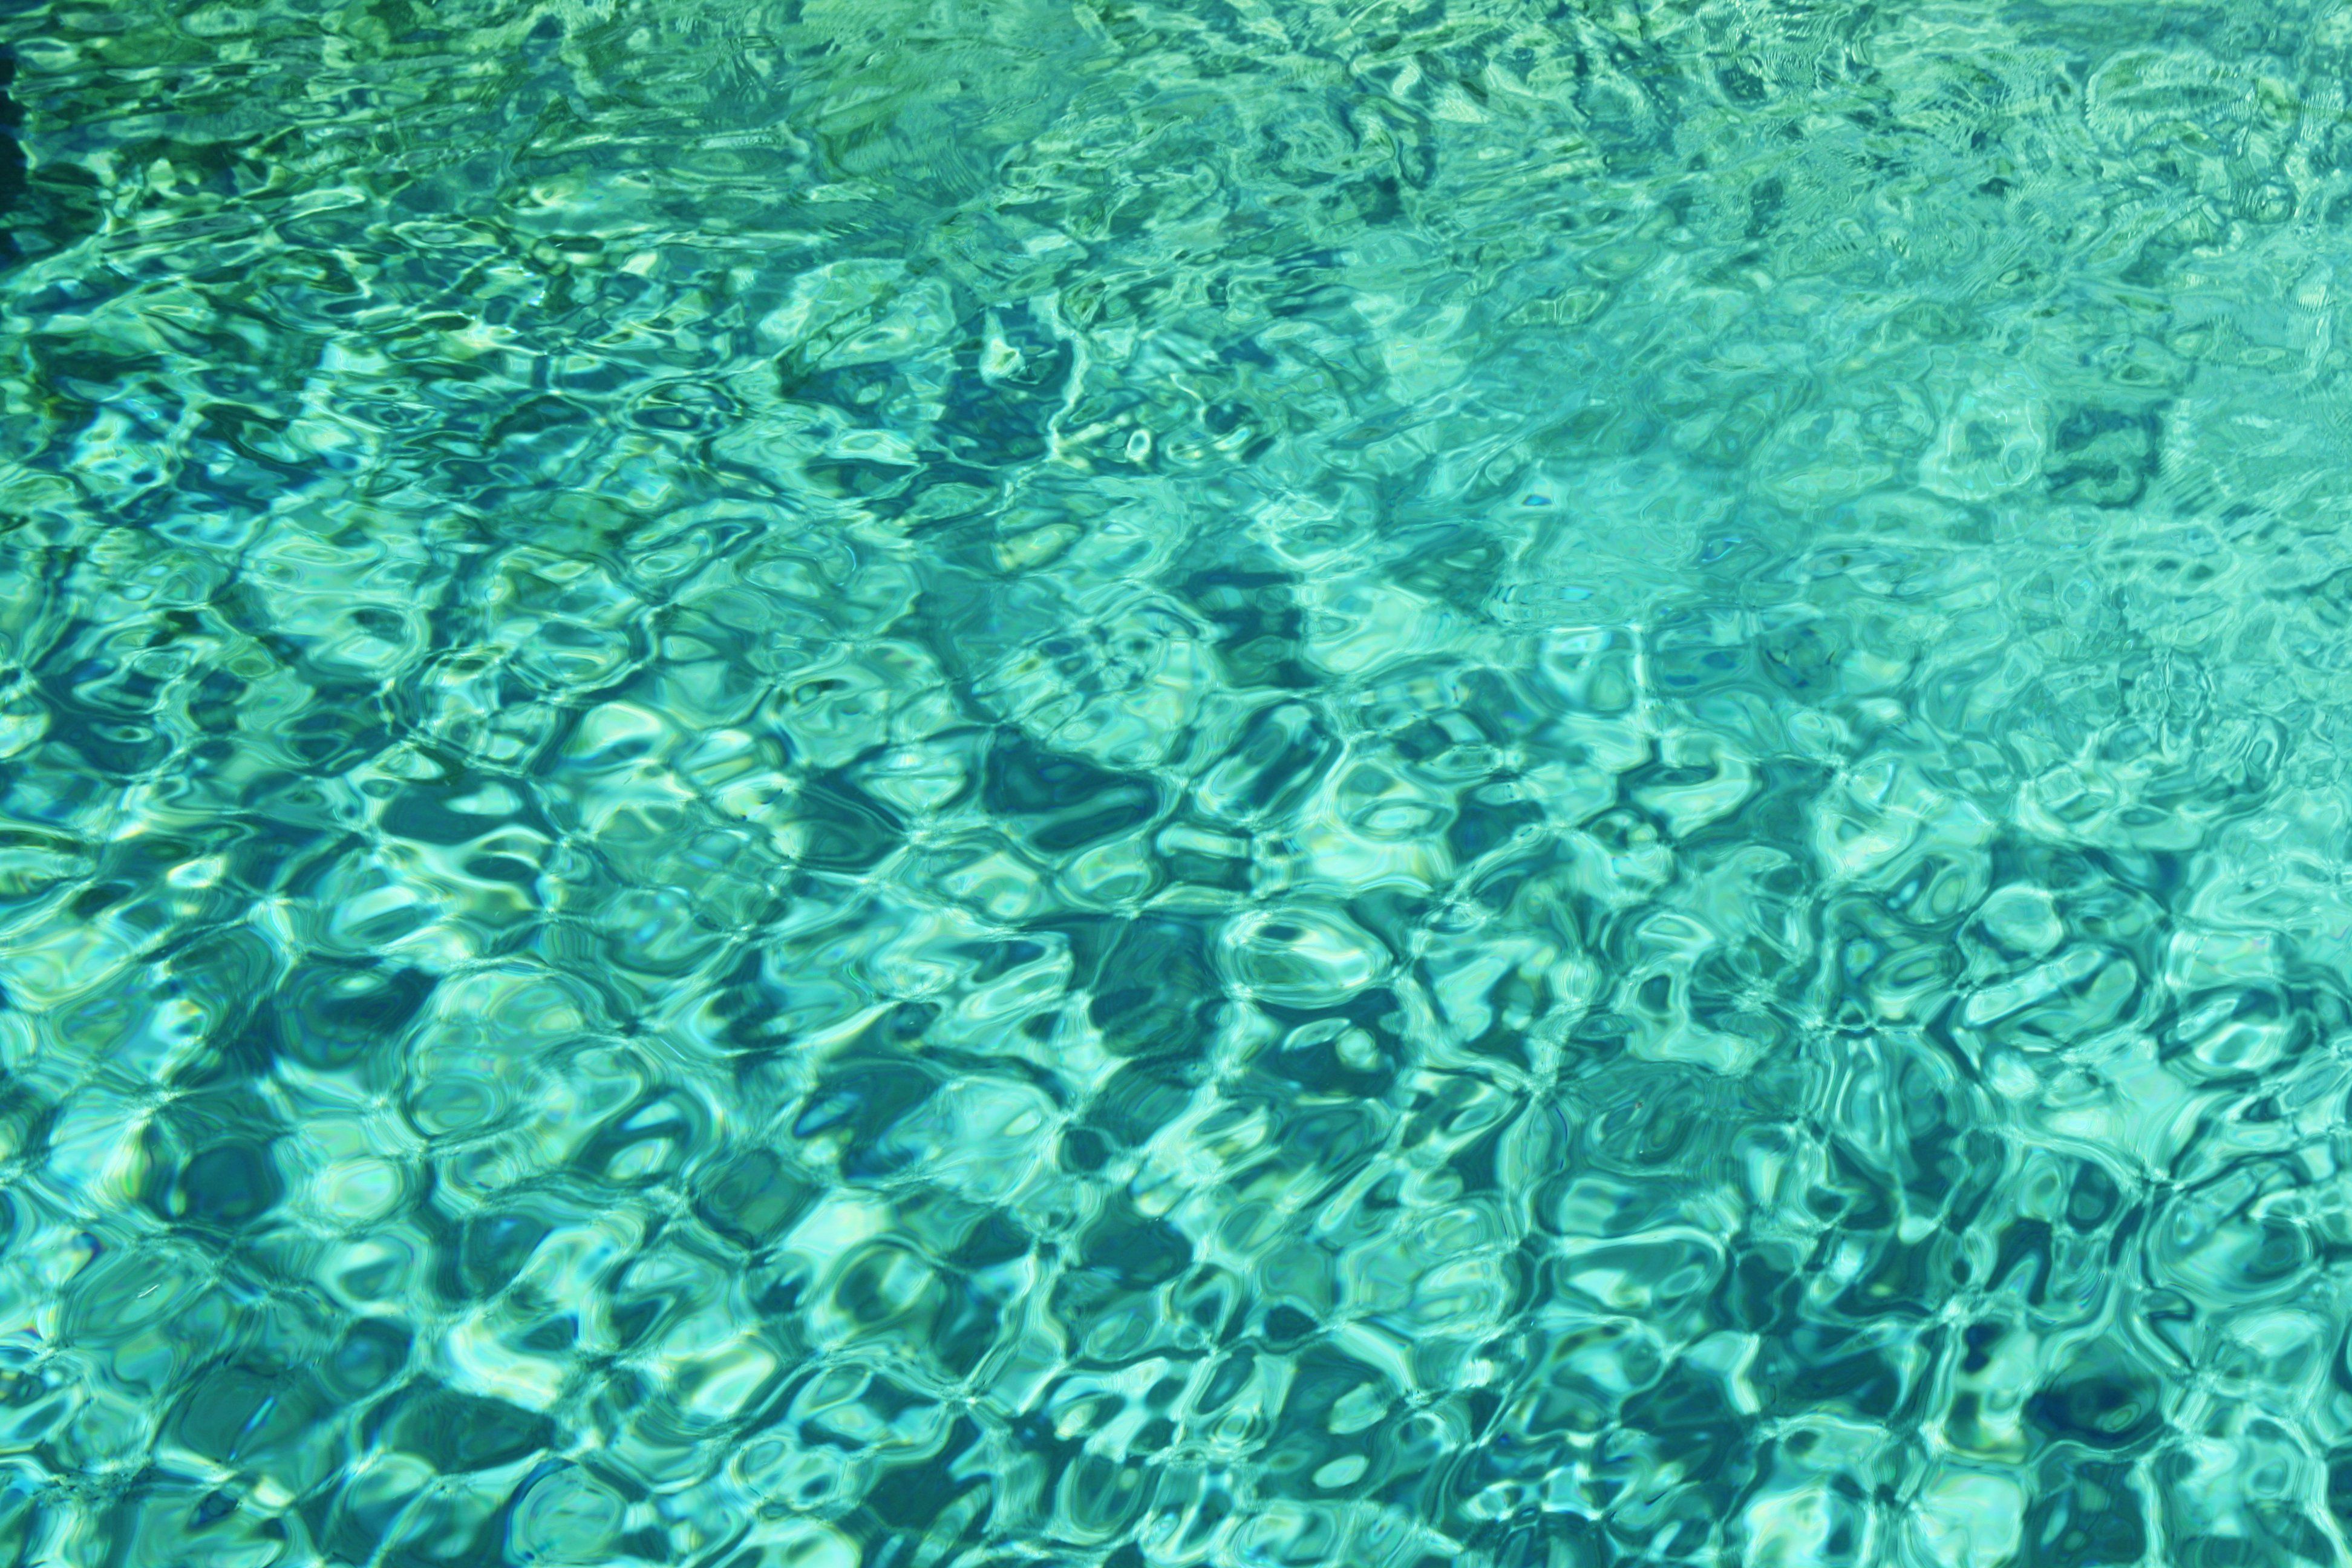 A pool of water with a blue and green reflection. - Aqua